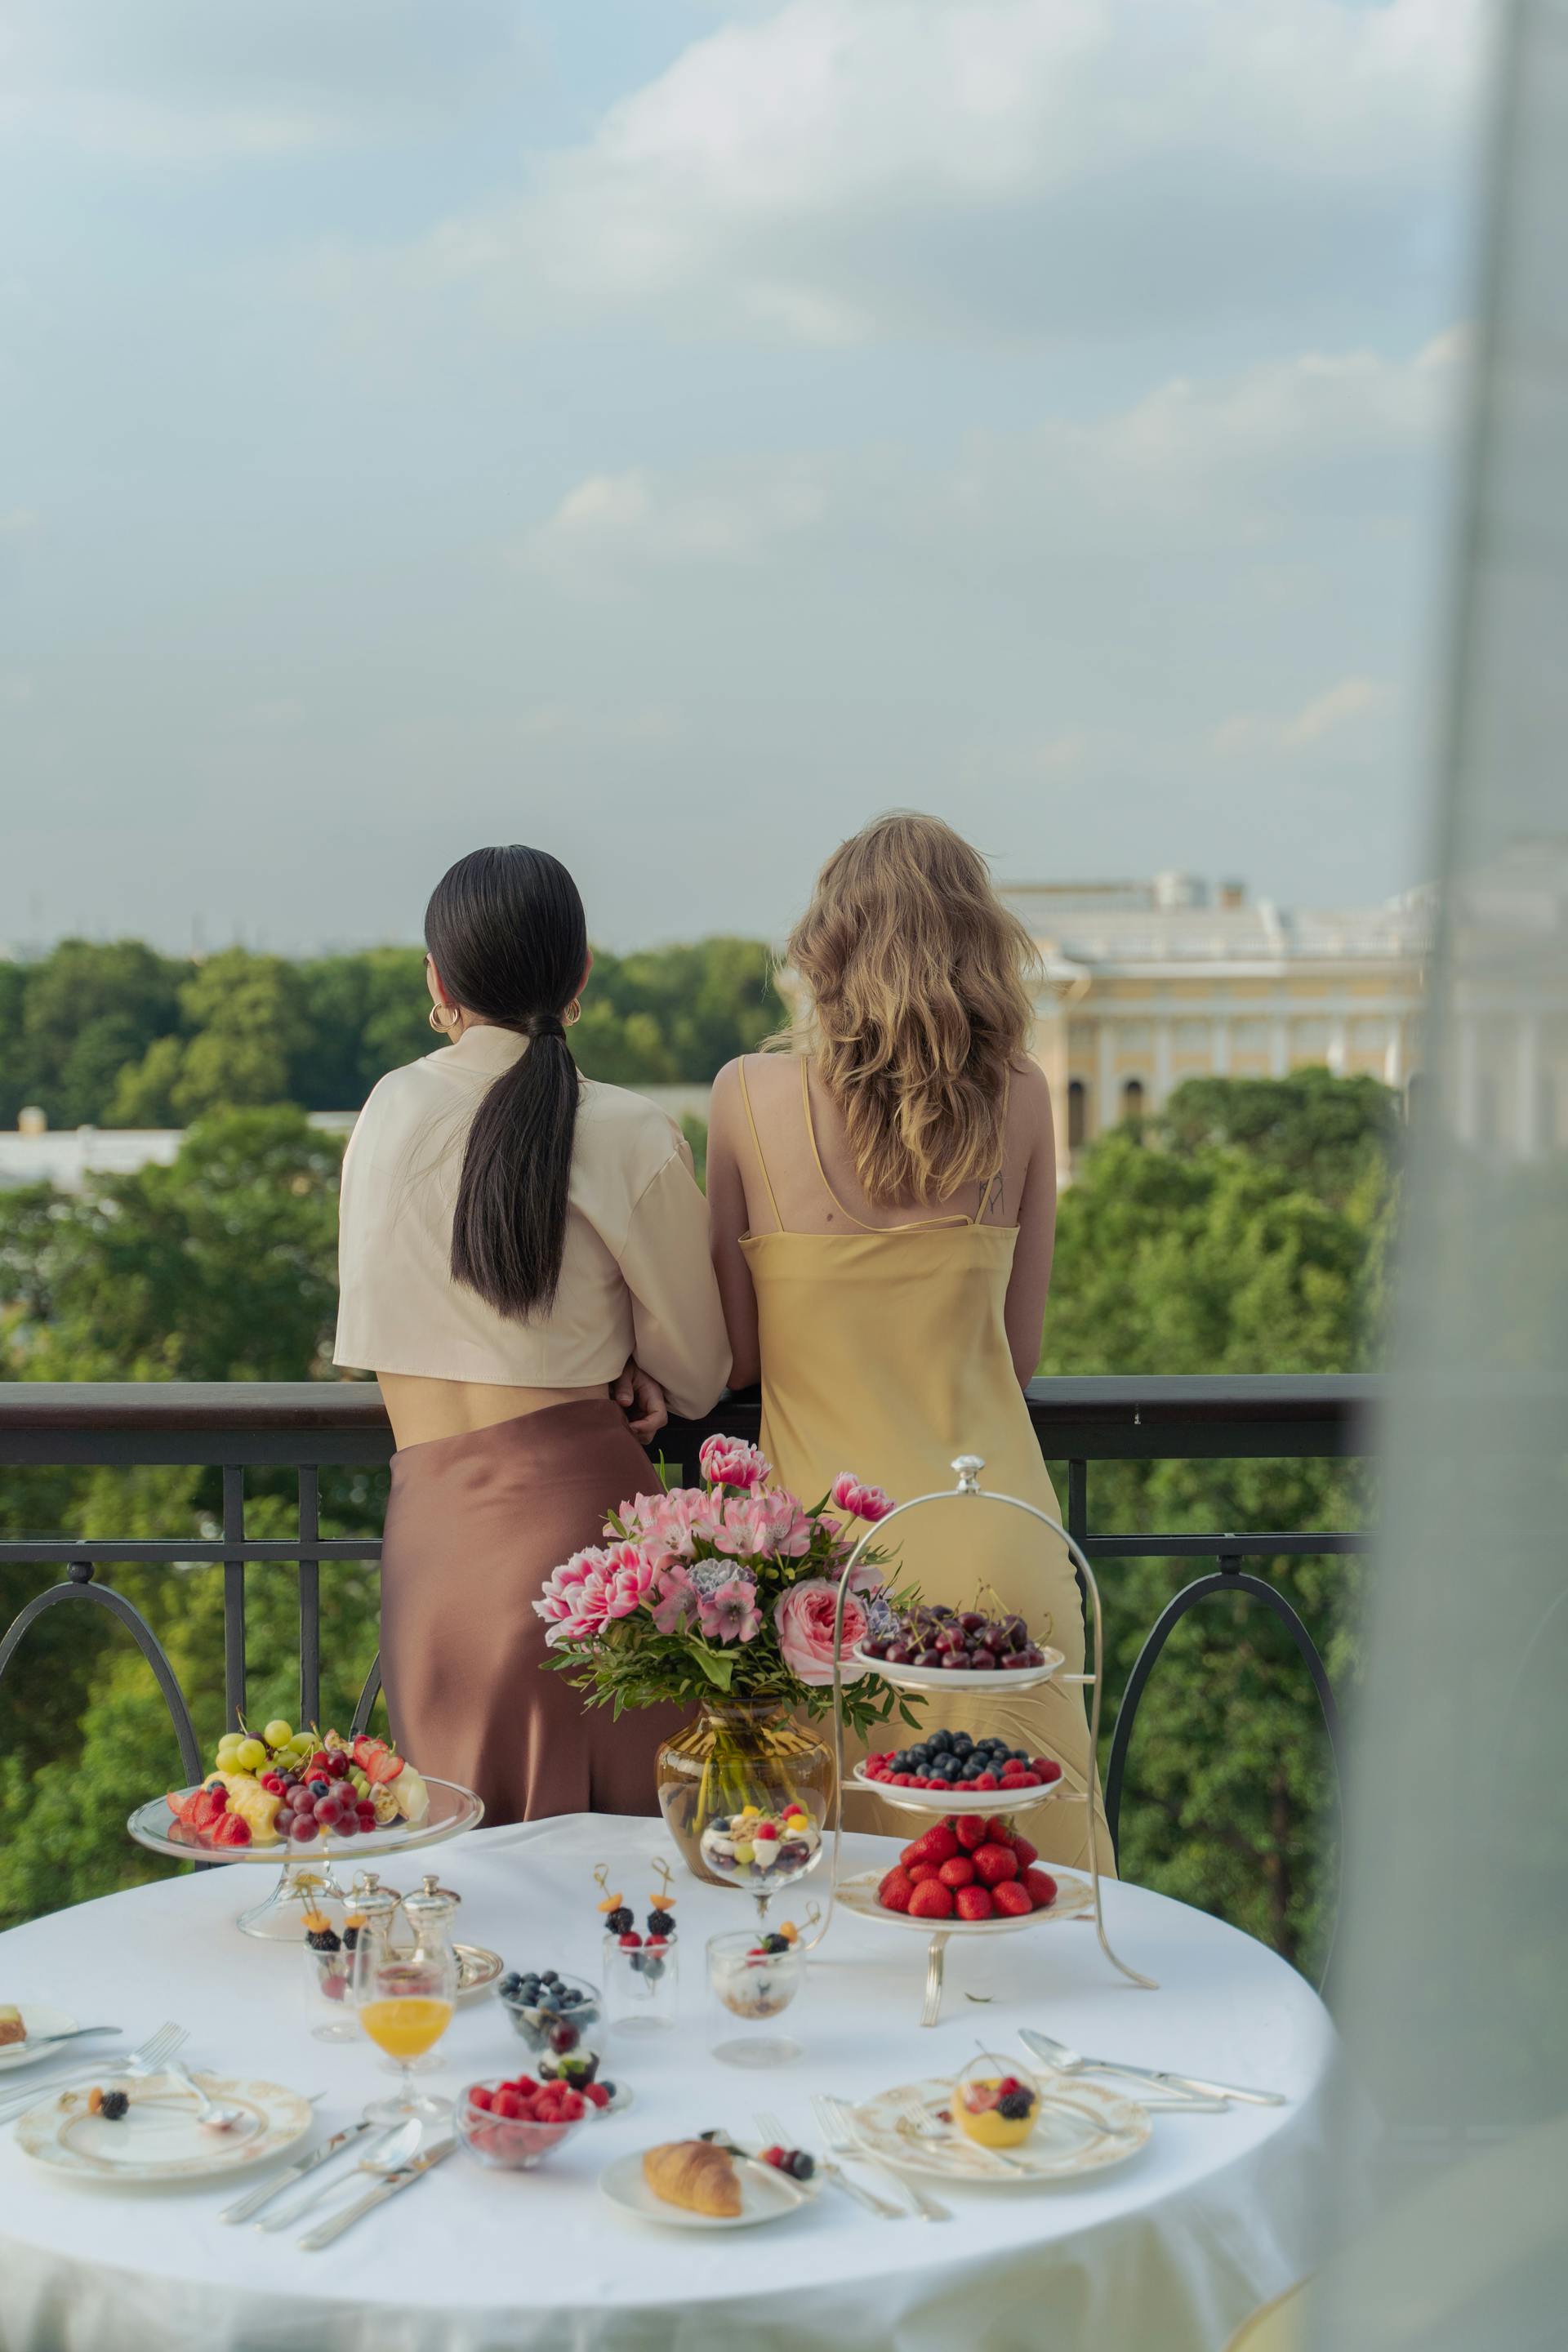 A back view of women standing in a balcony | Source: Pexels